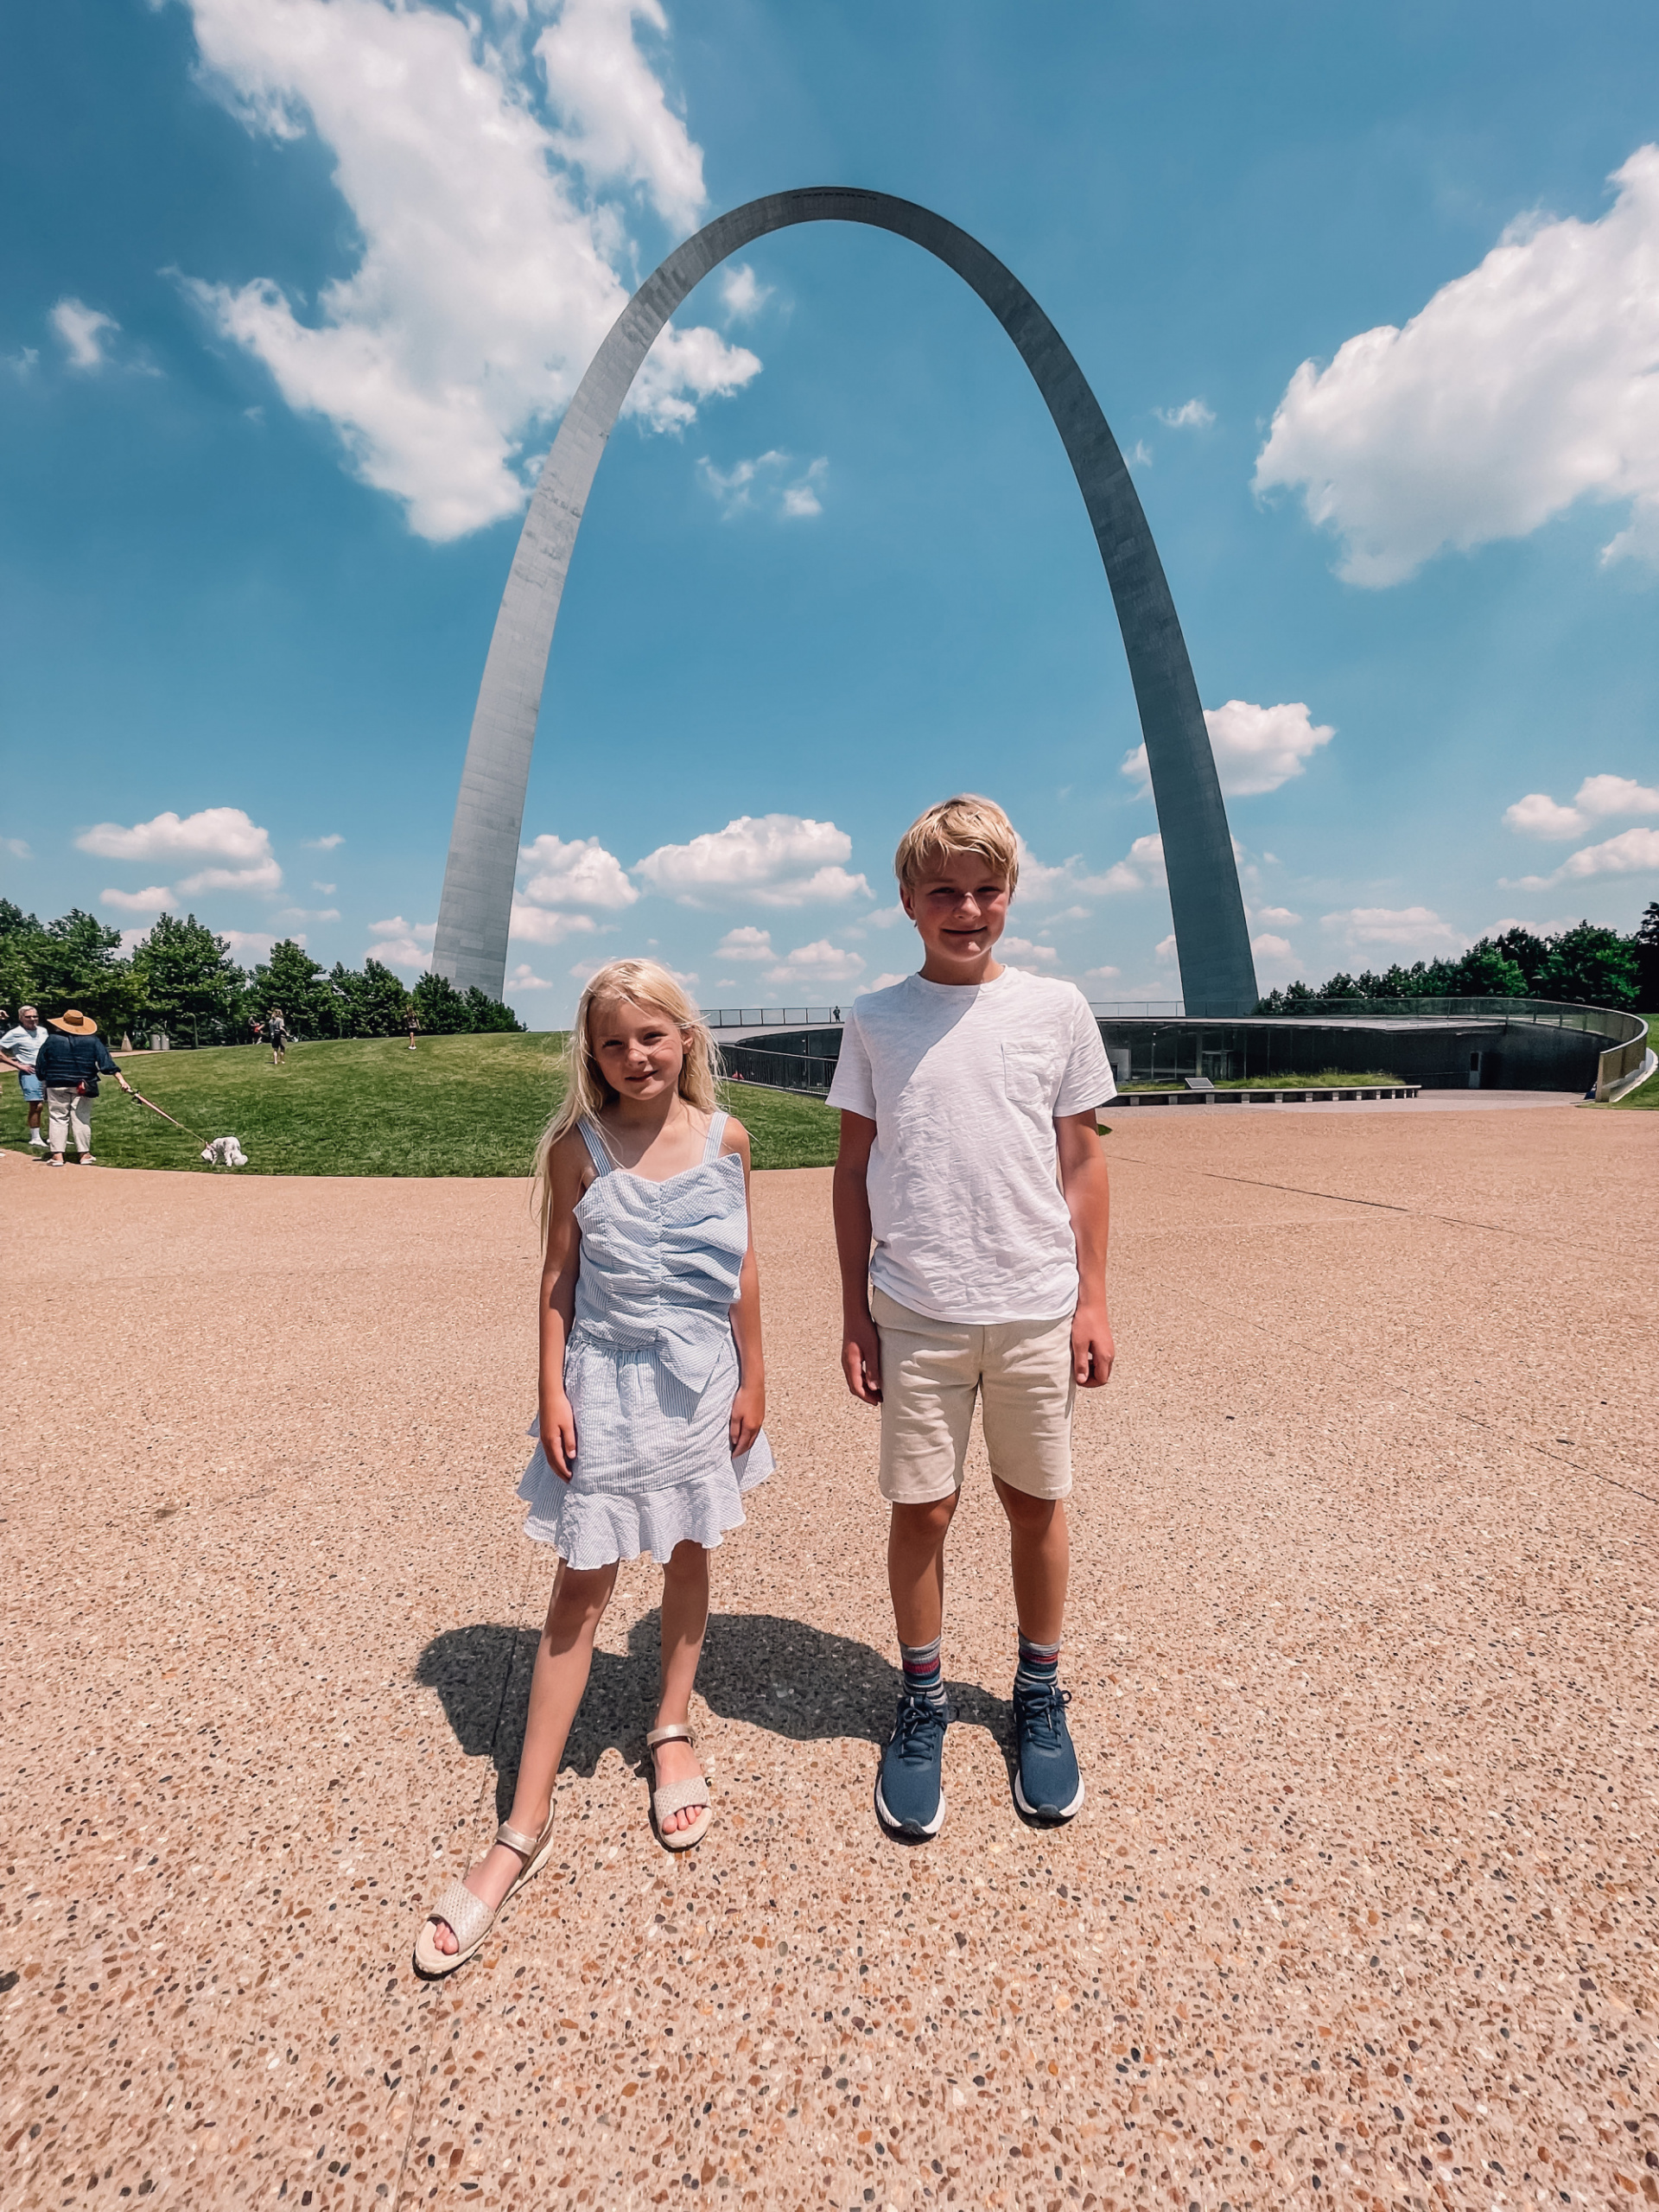 where to stop on a cross-country road trip, best places to stop on a cross country road trip, cross country road trip, west coast to east coast road trip, erin busbee, traveling with kids, how to travel with kids, how to travel with a dog, cross country road trip with kids, st. louis, Missouri, the gateway arch, gateway arch national park, cross country busbee style, family road trip